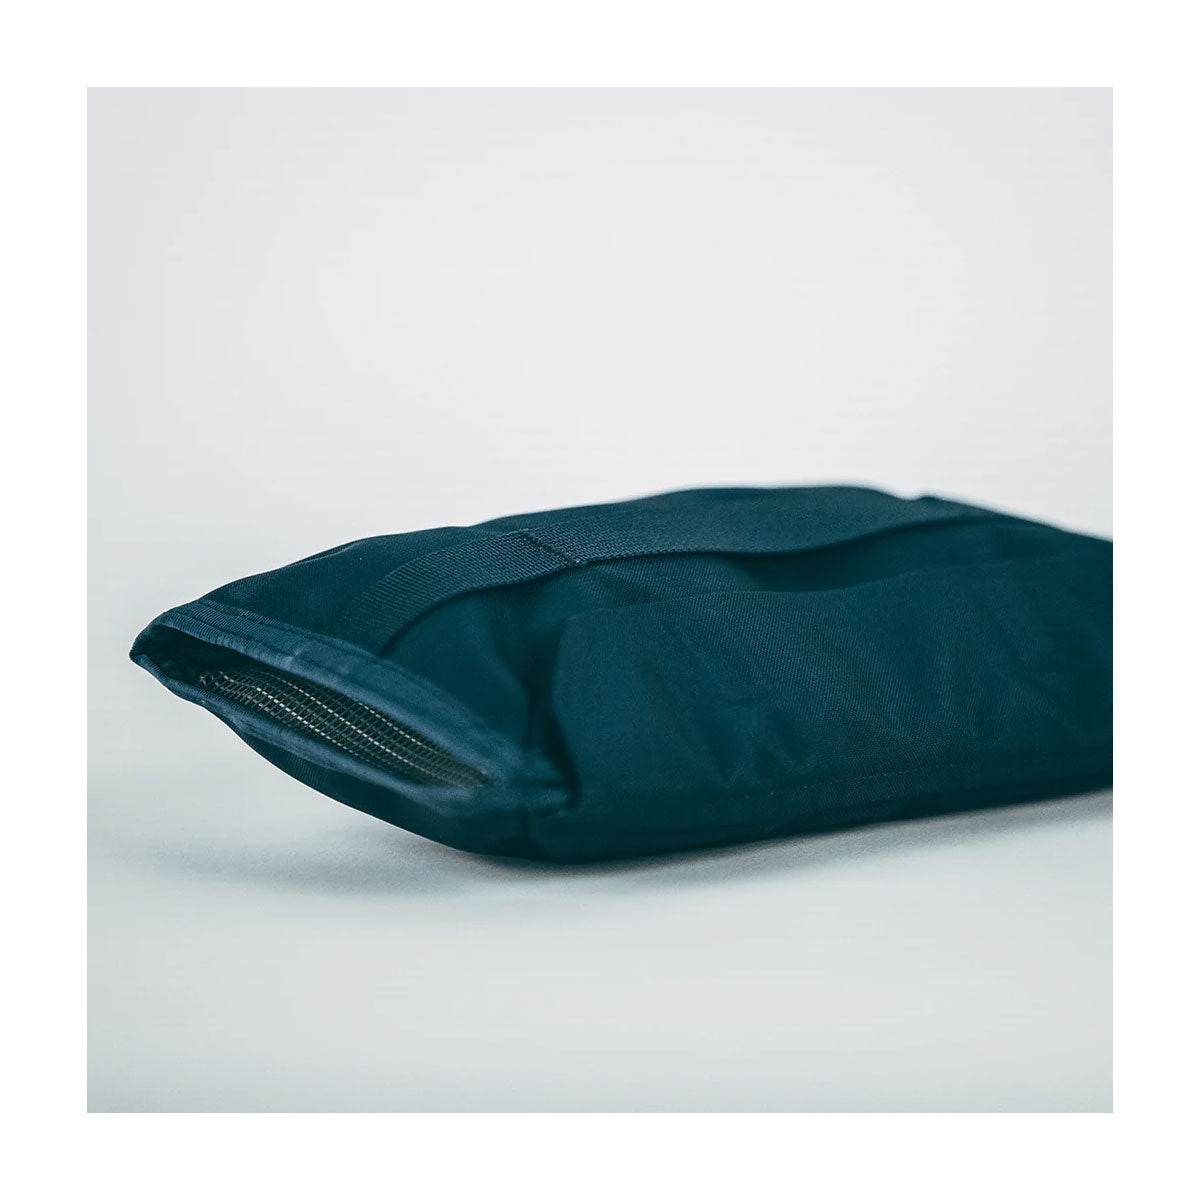 EVERGOODS : Civic Access Pouch 1L : Solution Dyed Black